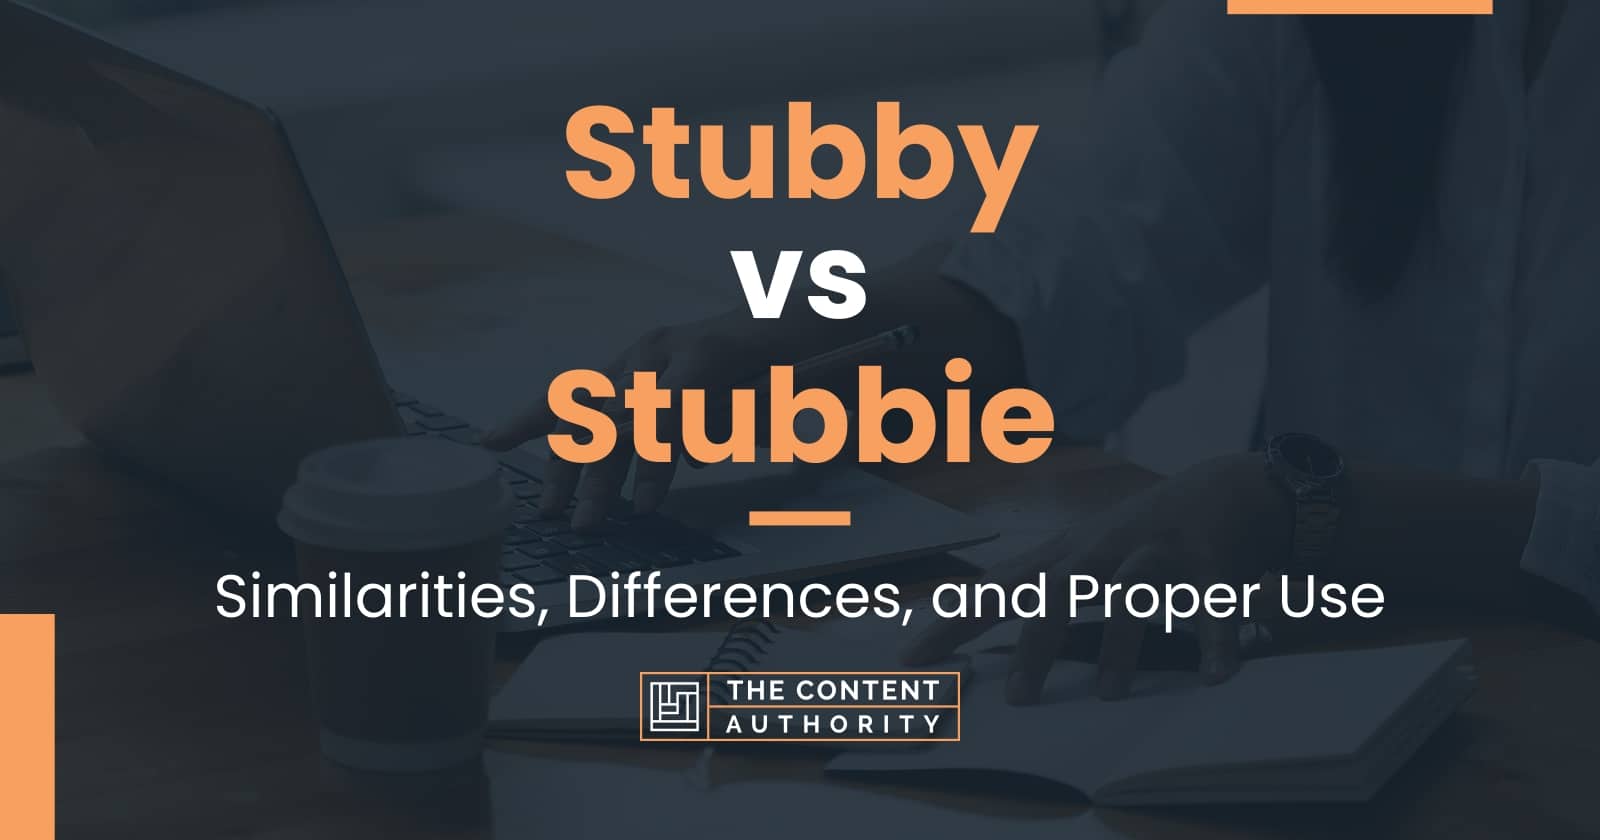 Stubby vs Stubbie: Similarities, Differences, and Proper Use